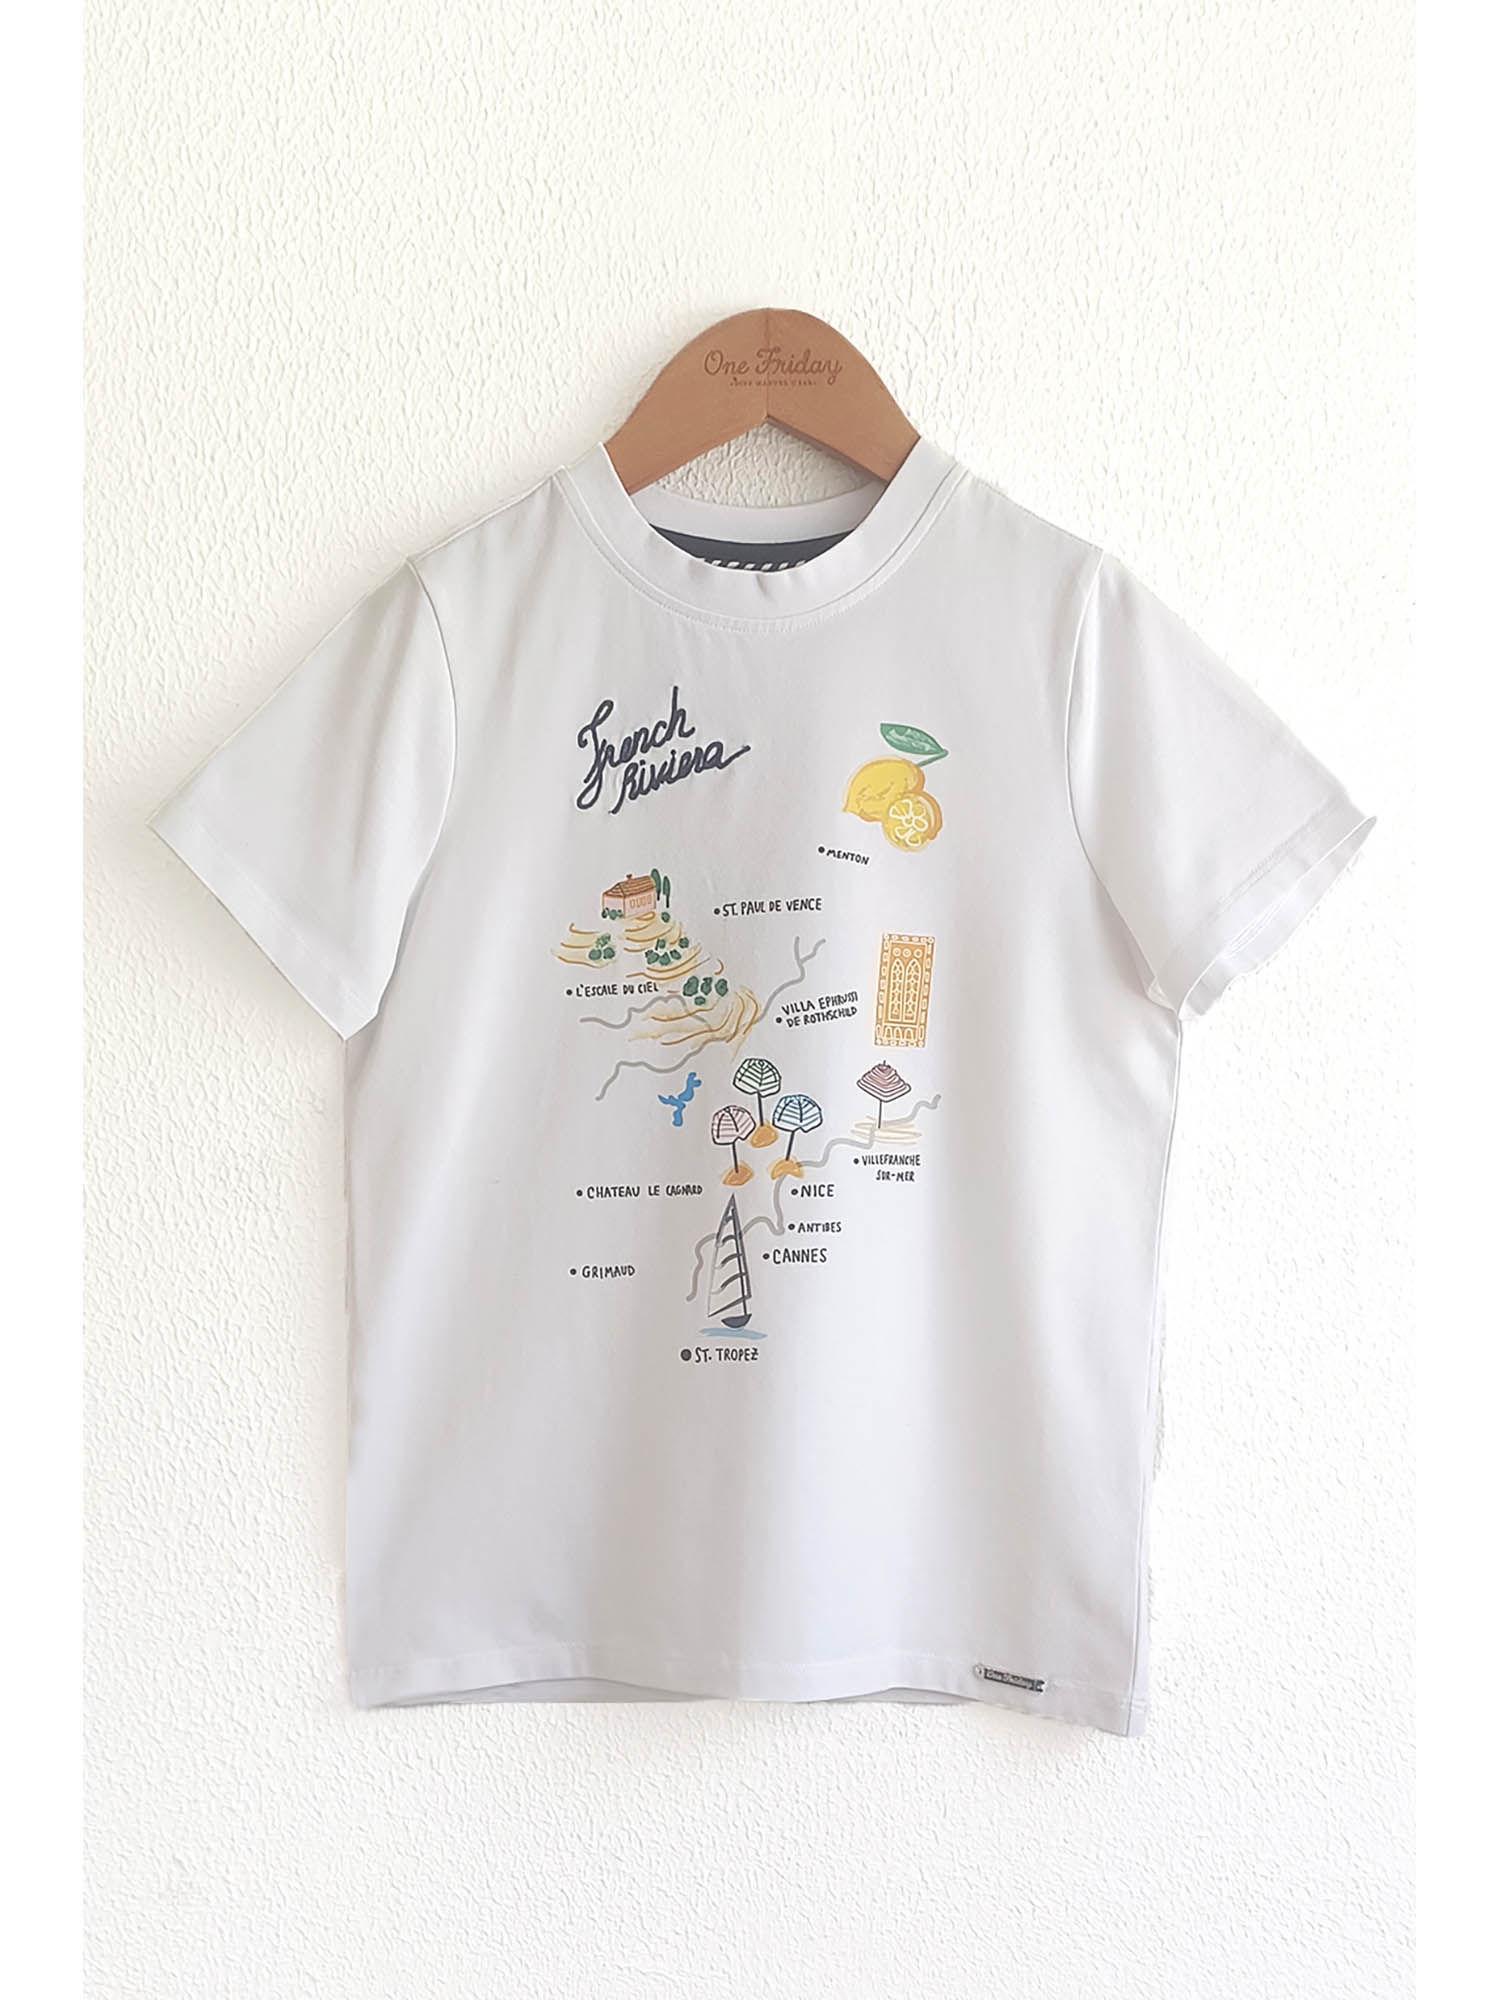 white tee with big graphic